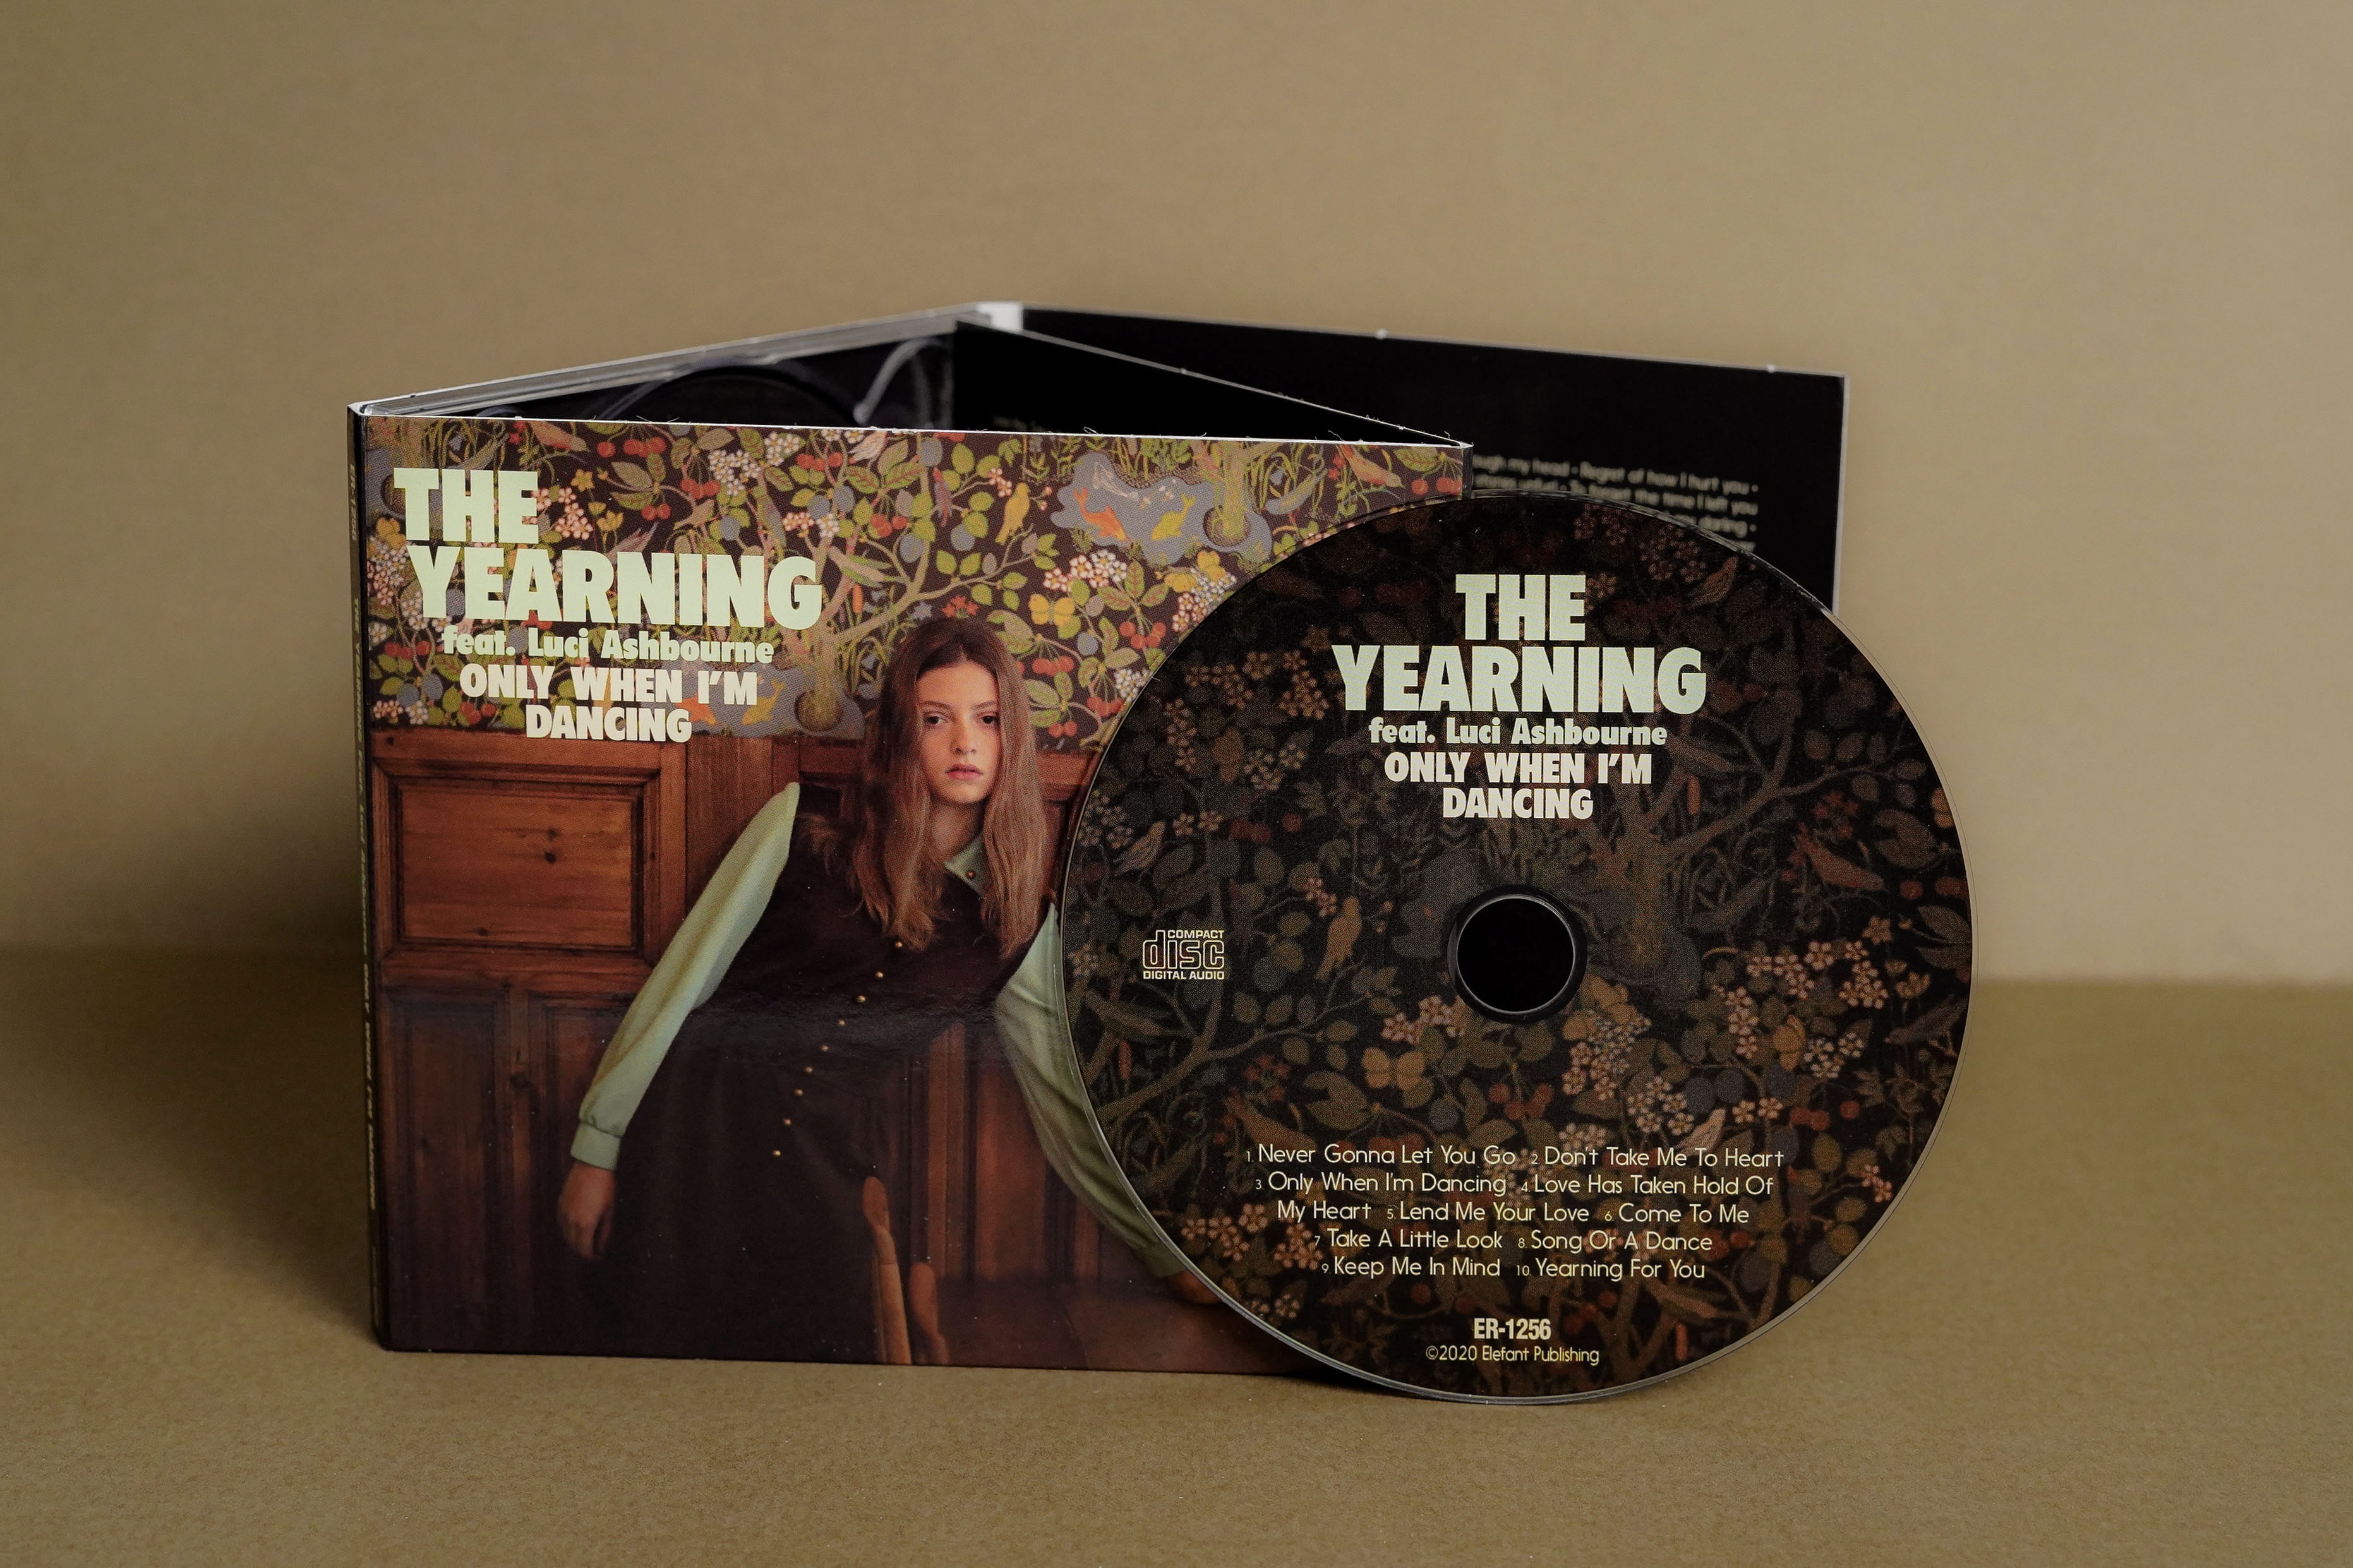 The Yearning "Only When I'm Dancing" CD